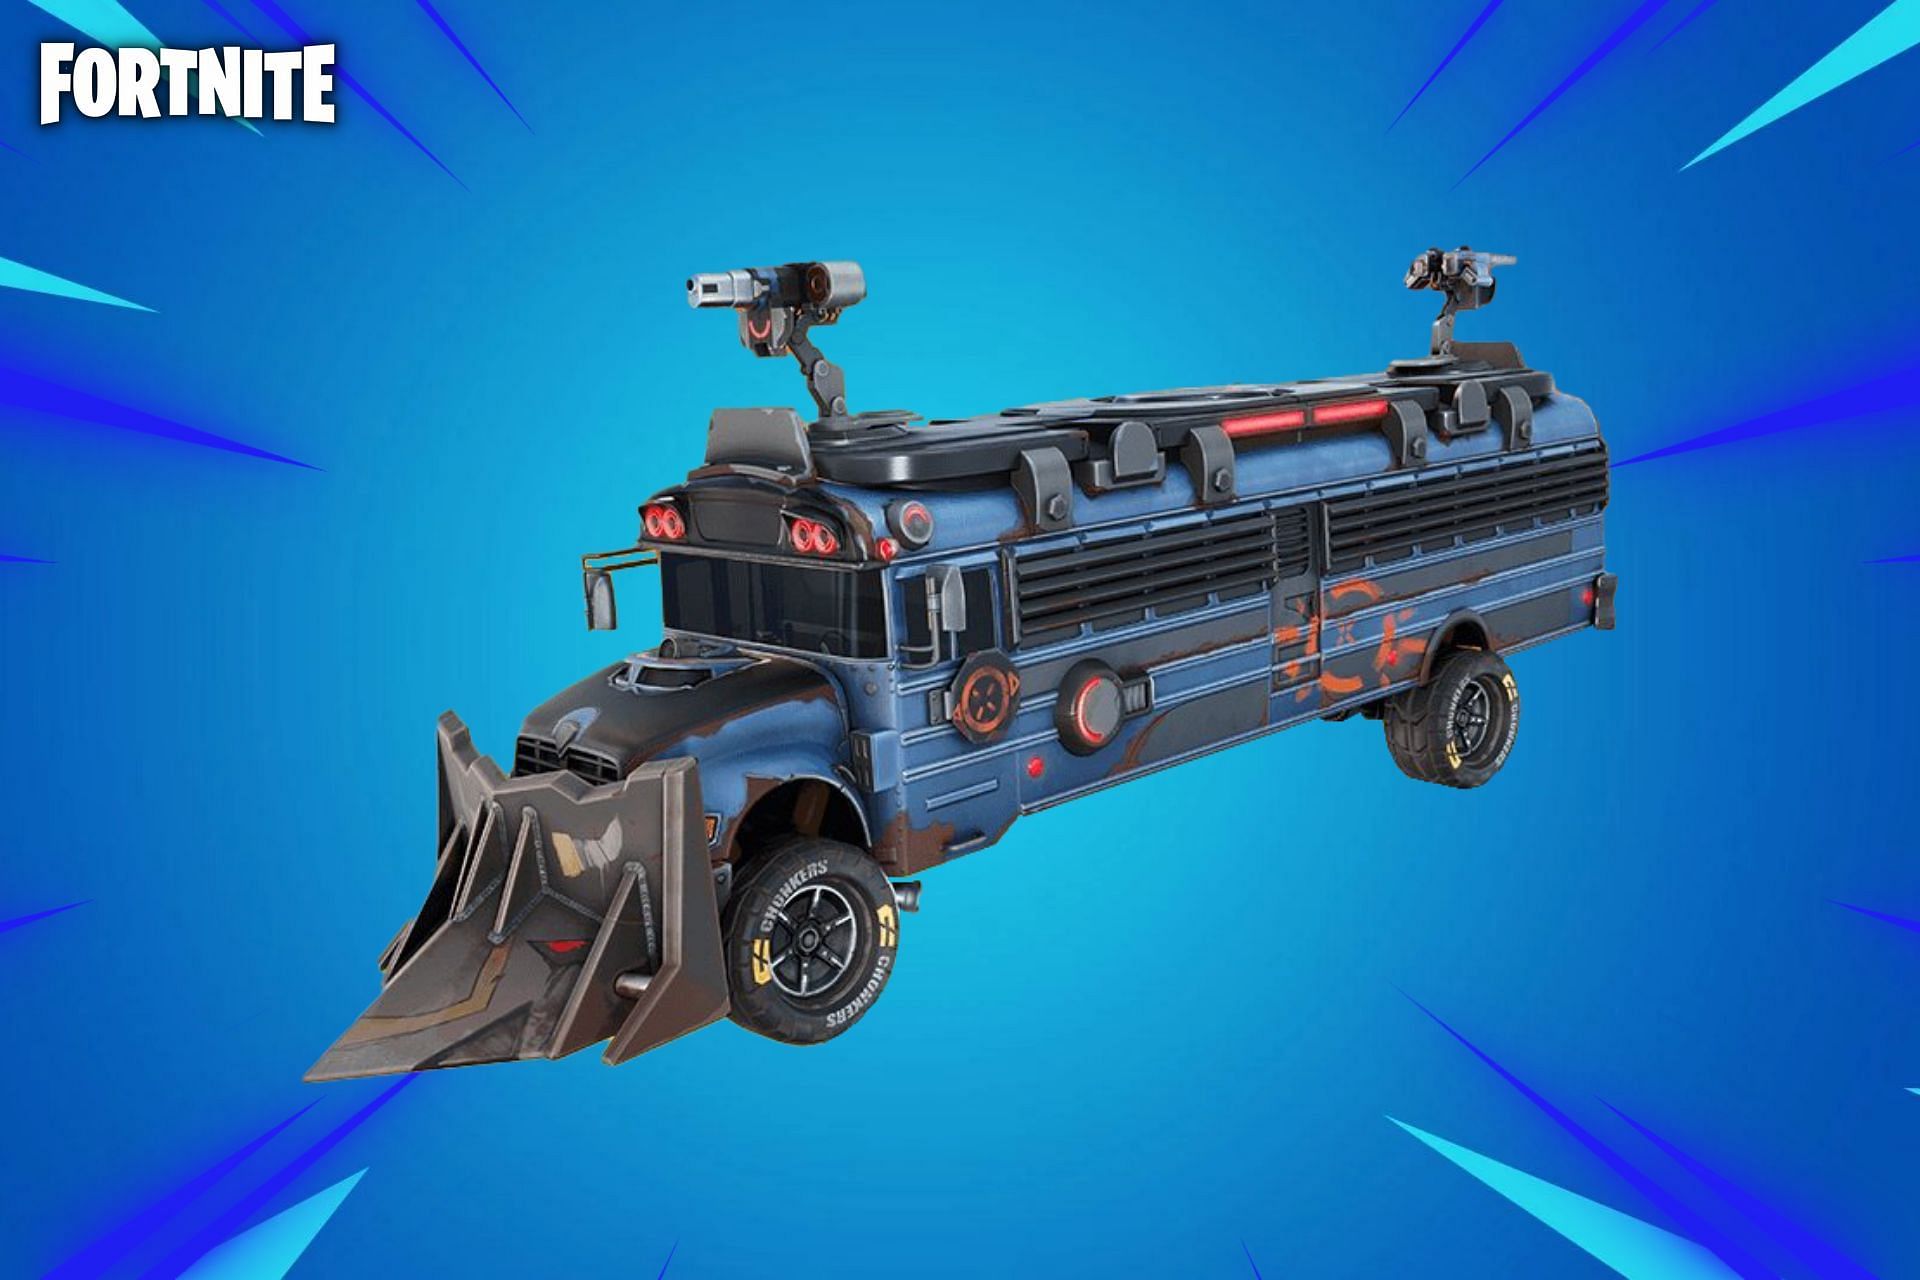 Armored Battle Bus is now available on the Fortnite Chapter 3 Season 2 map (Image via Sportskeeda)